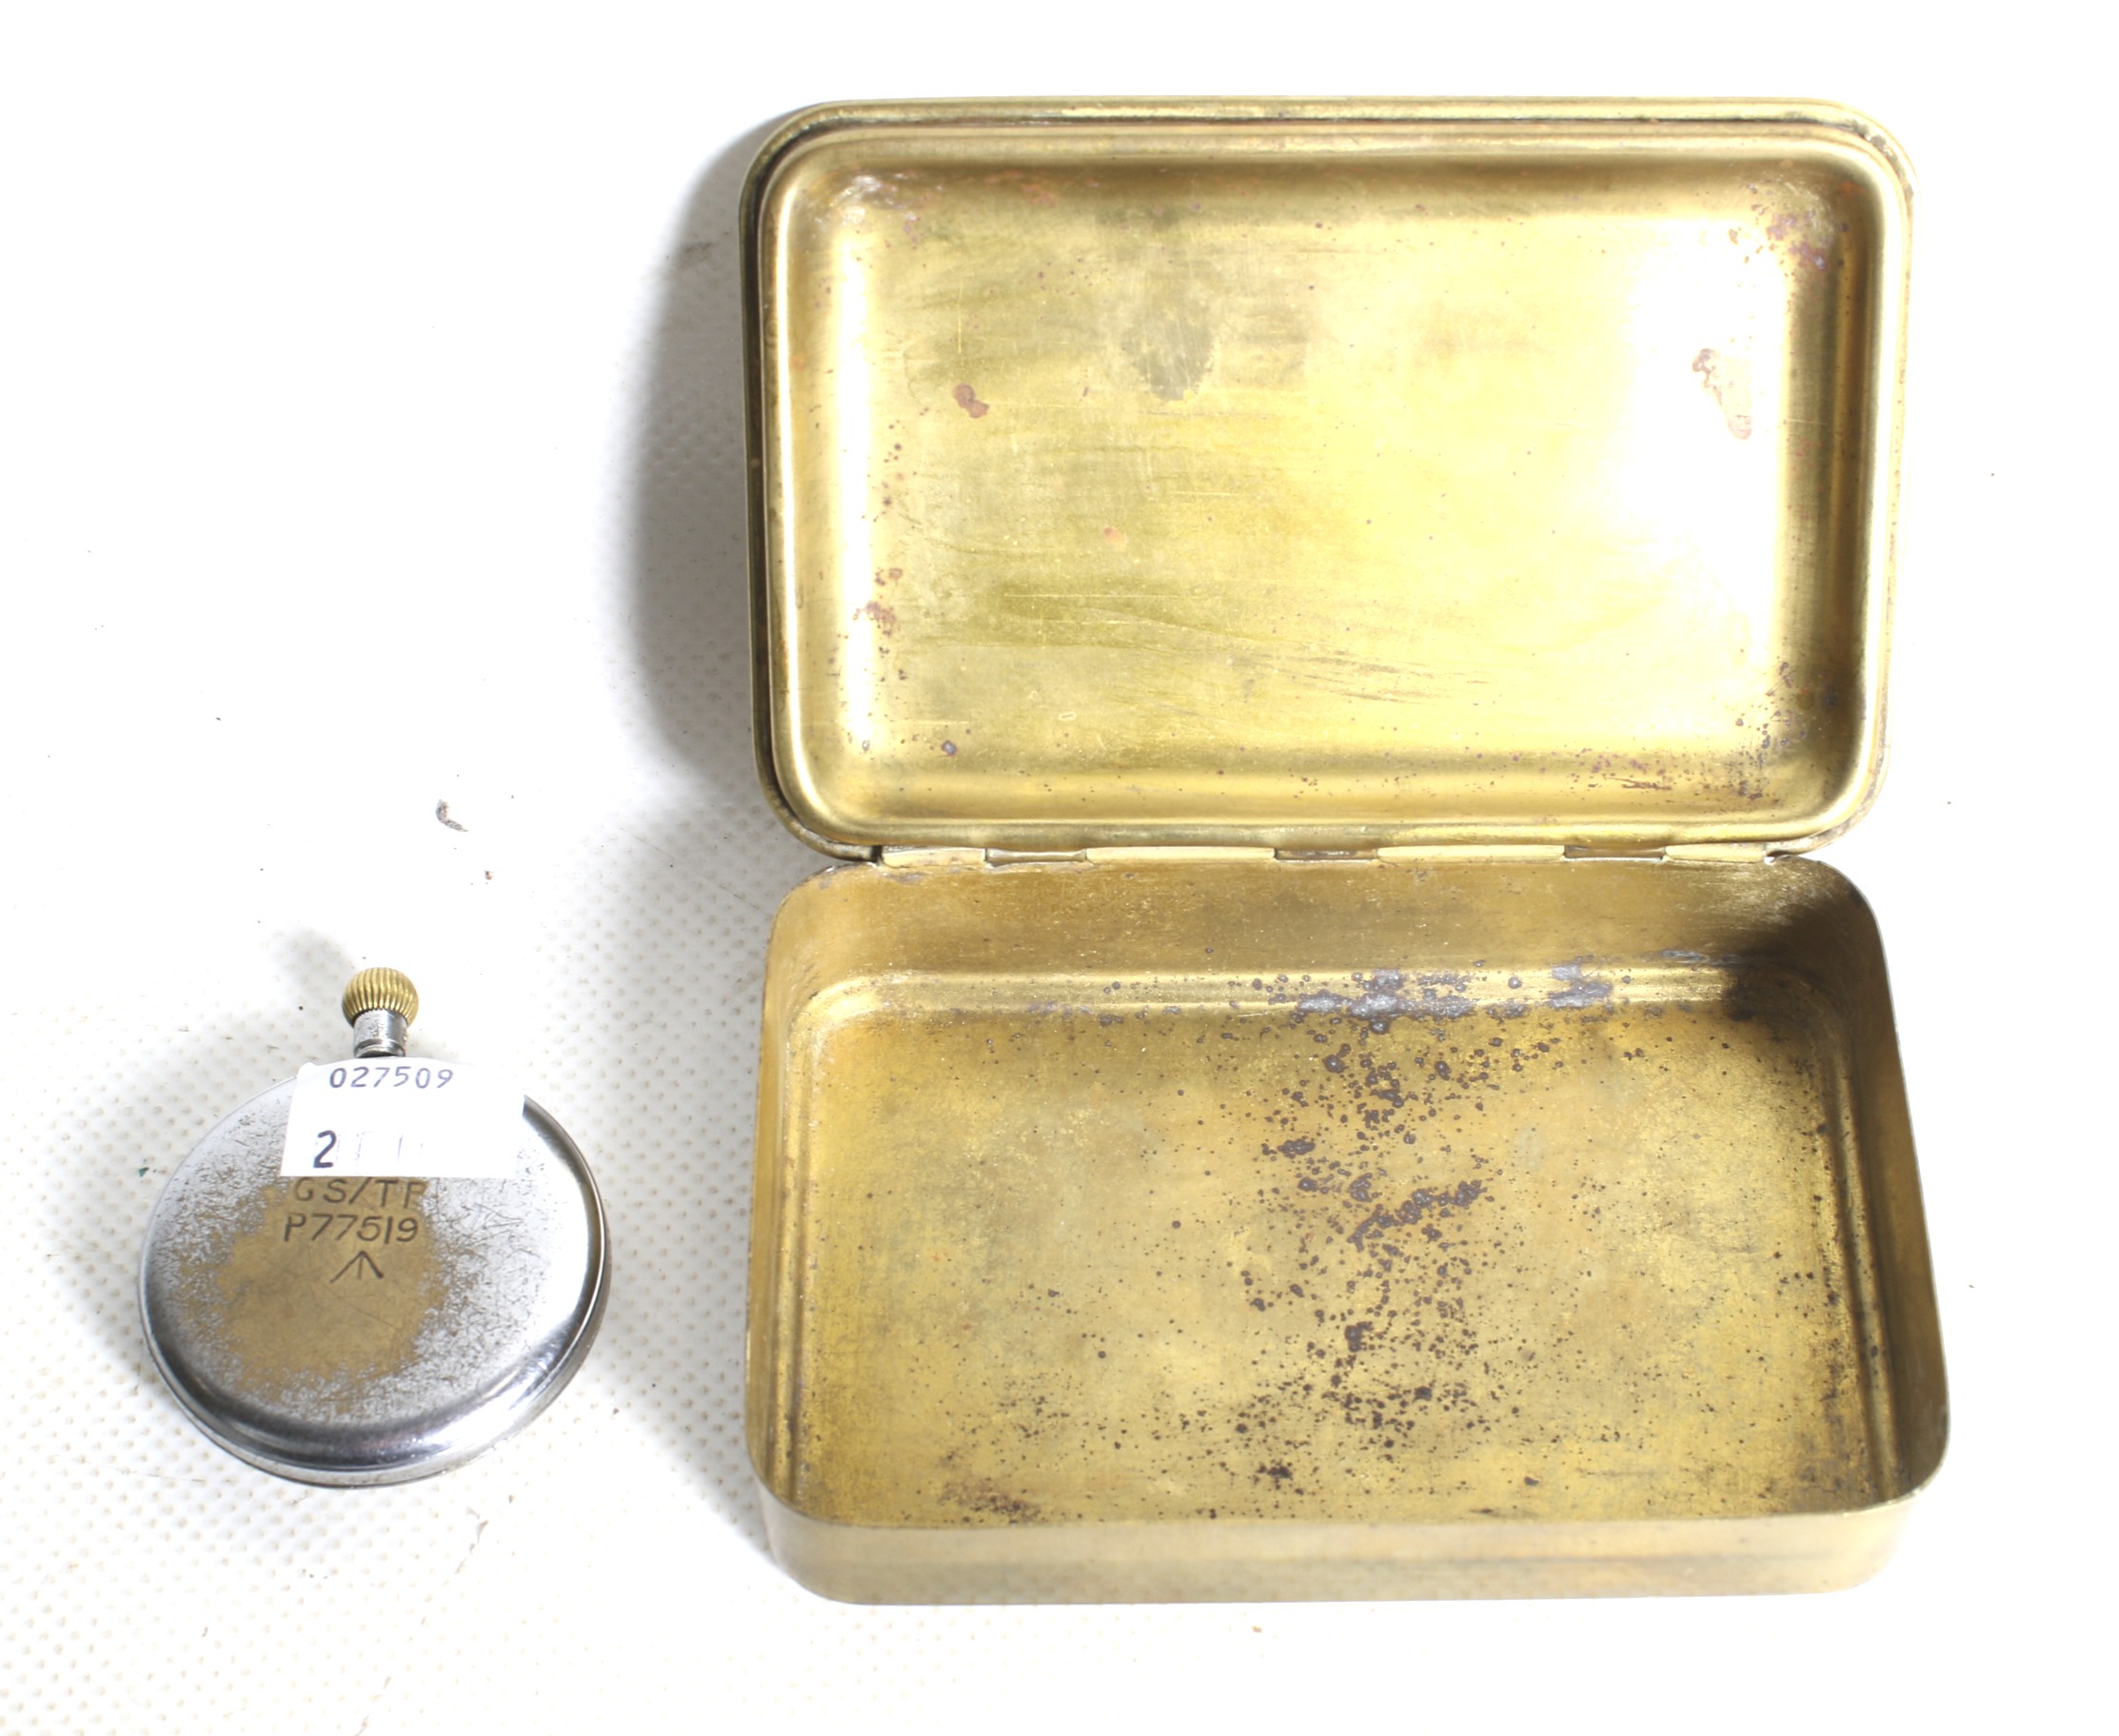 A 1914 Princess Mary Christmas tin and a WWII British military pocket watch. - Image 2 of 2